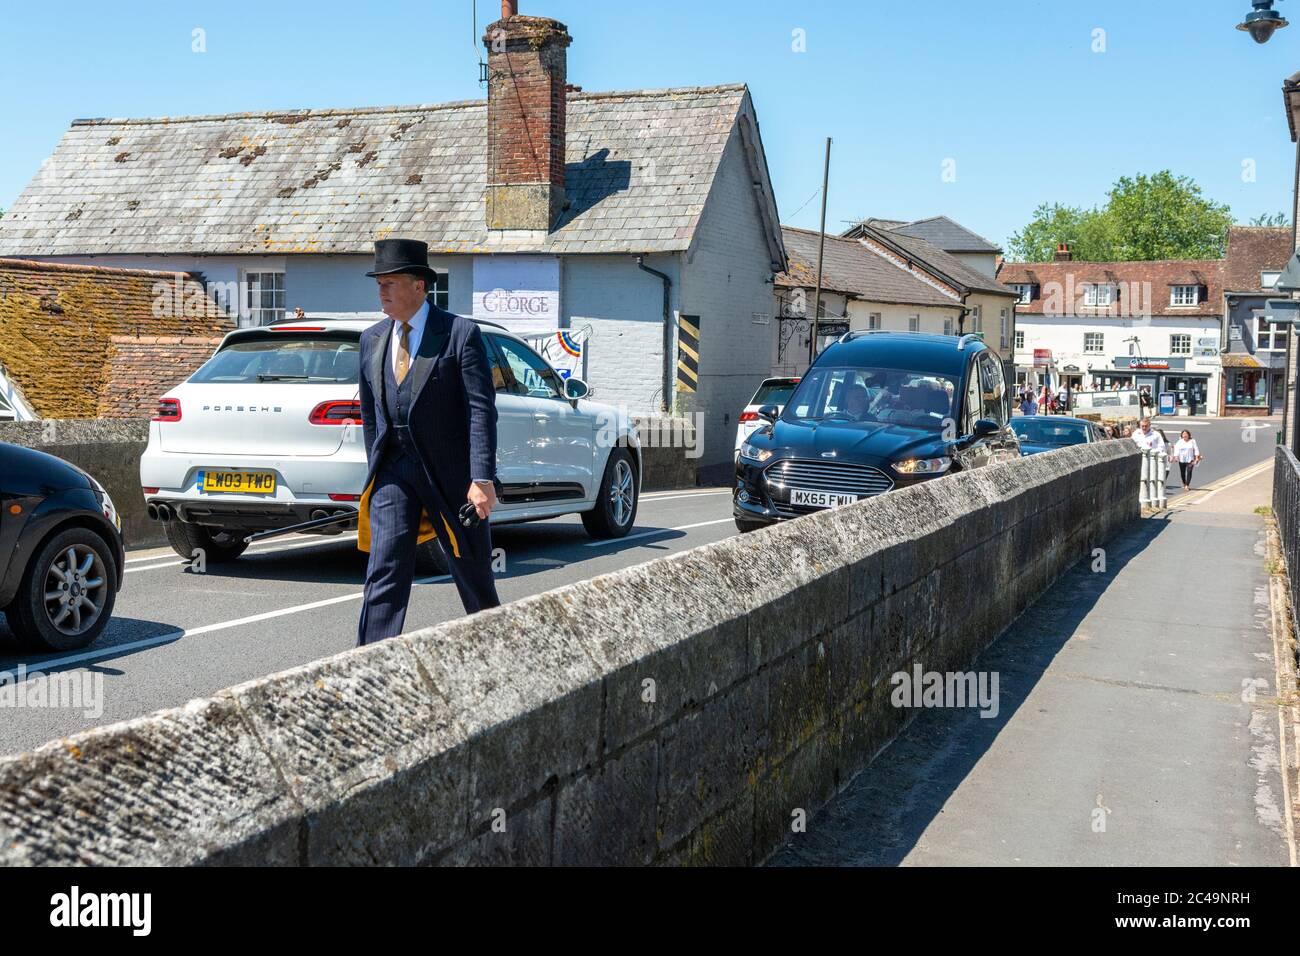 Fordingbridge, New Forest, Hampshire, UK, 25th June 2020. Mid-summer heatwave peaks making it the hottest day with the highest UV levels so far this year and a temperature over 32 degrees. A funeral cortege makes its way over the bridge in the blistering heat of the midday sun. Credit: Paul Biggins/Alamy Live News Stock Photo